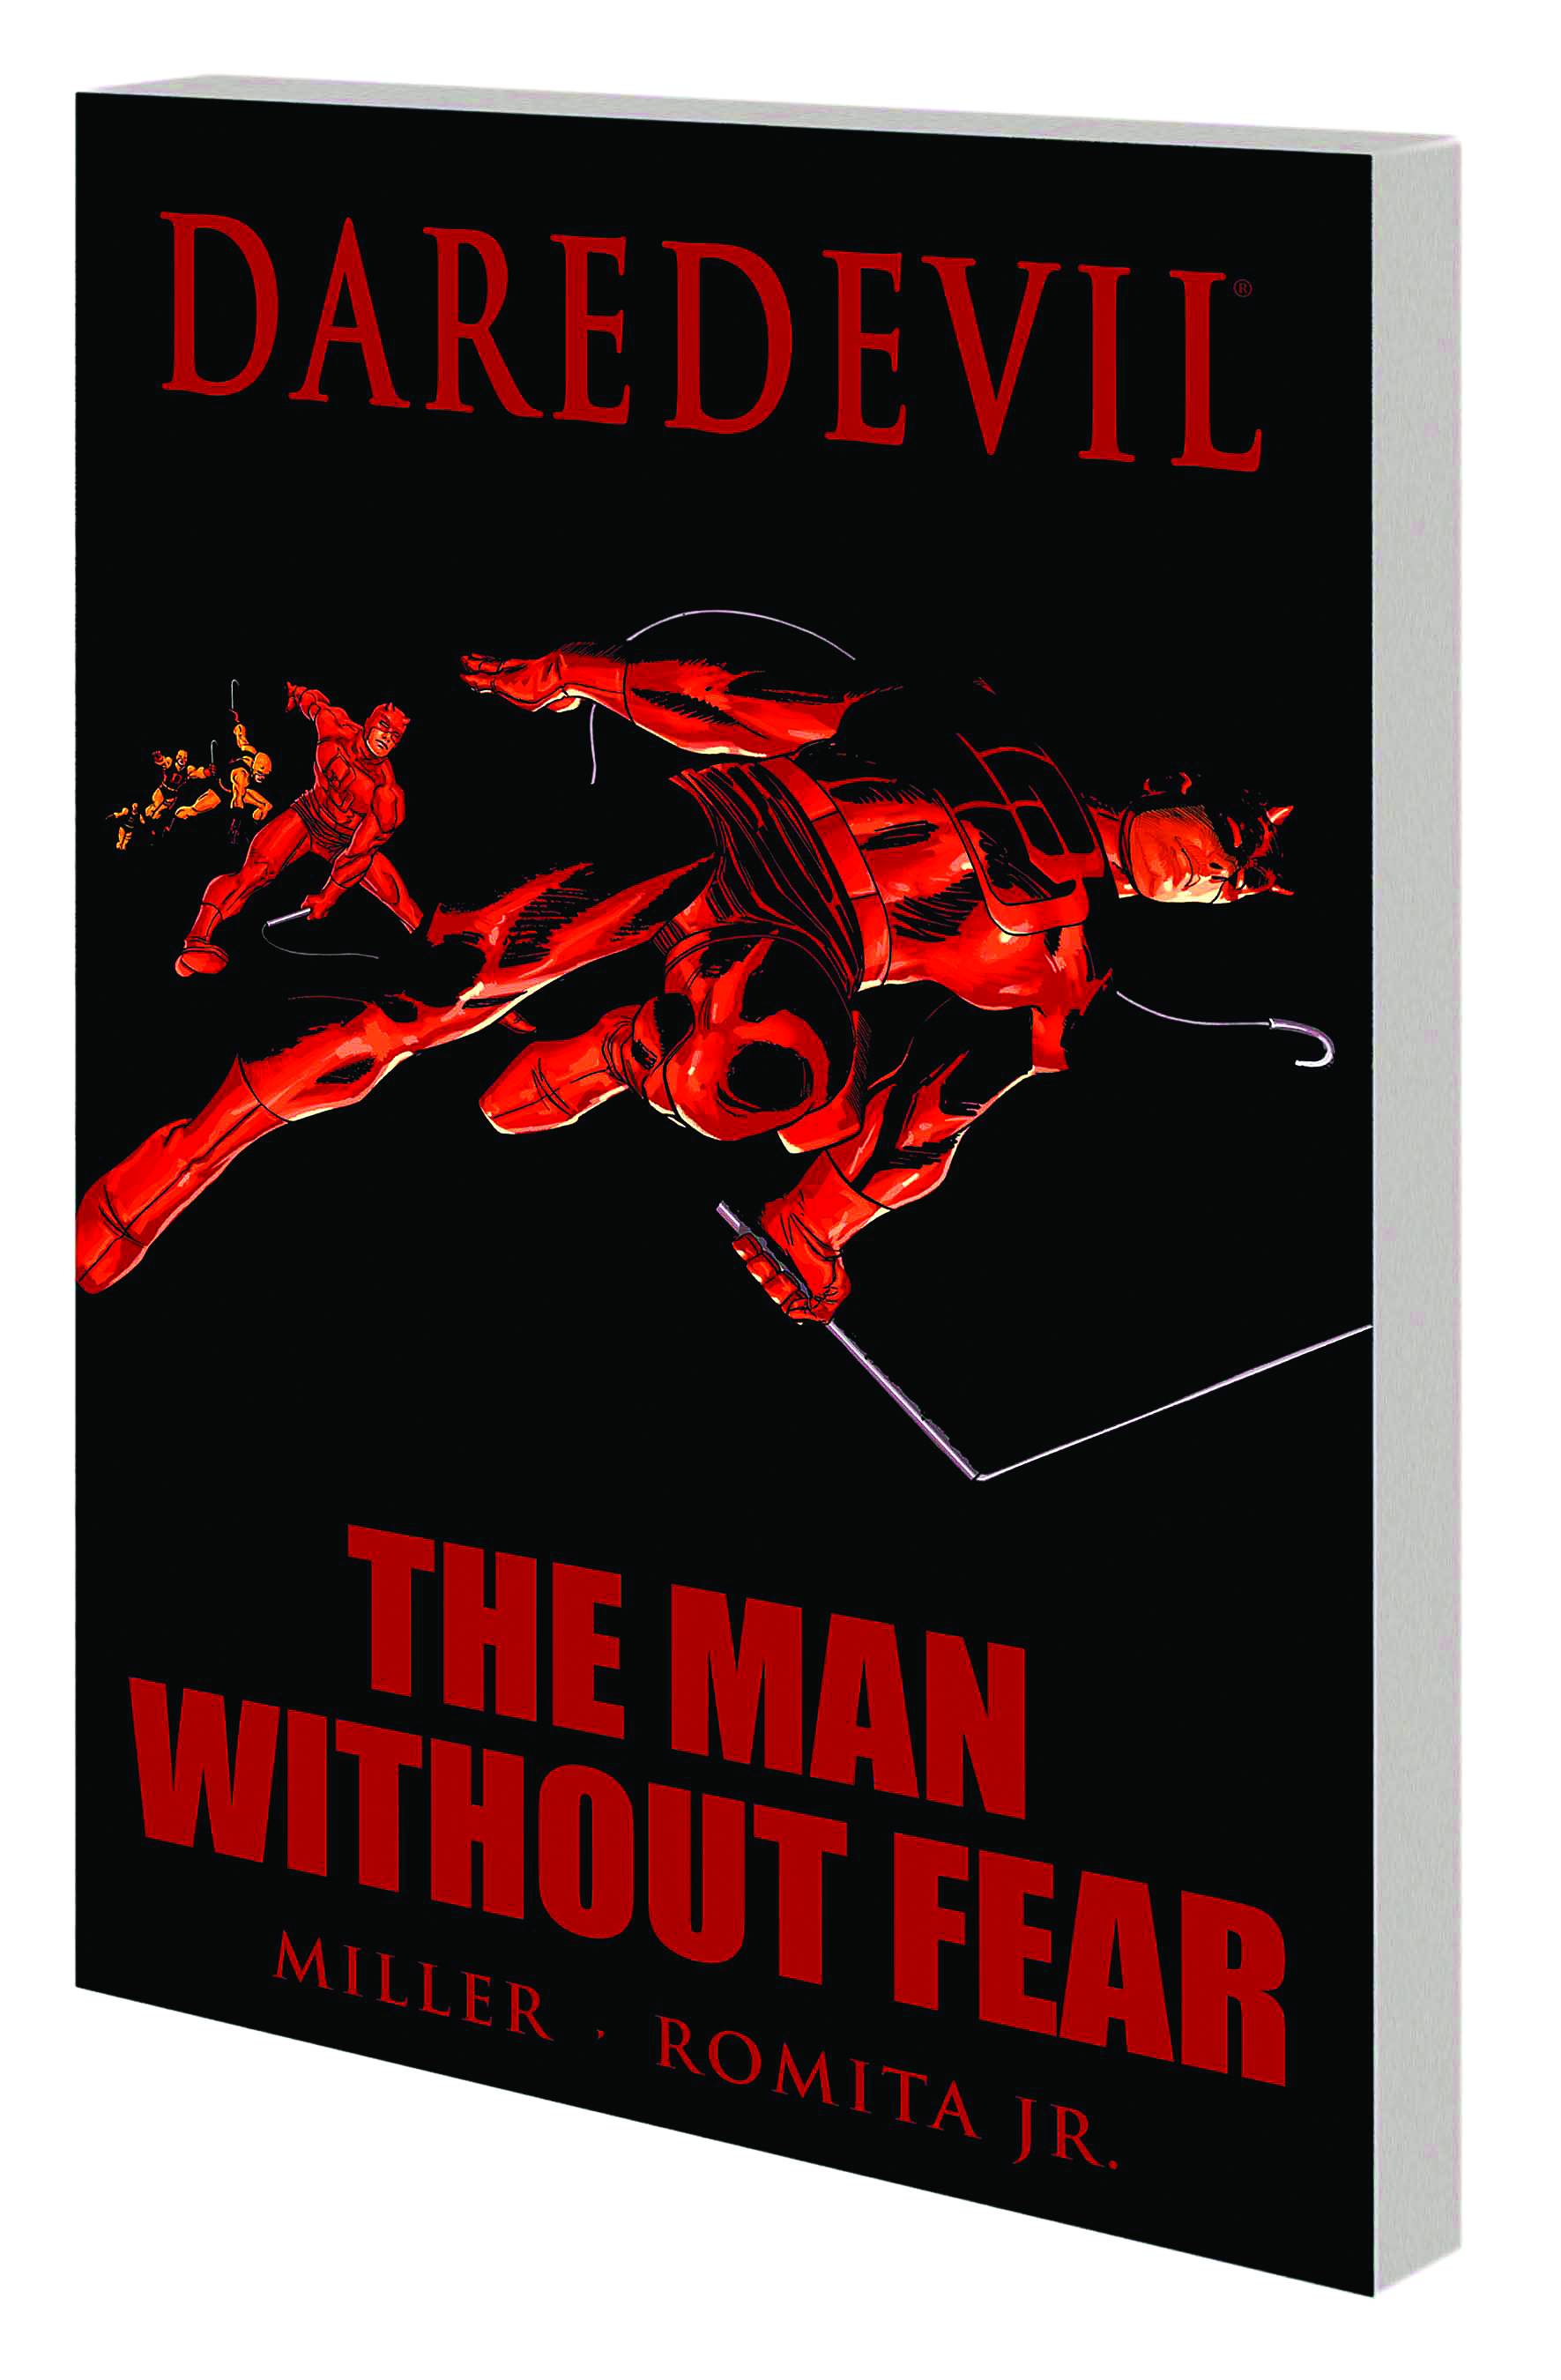 Daredevil The Man Without Fear Graphic Novel